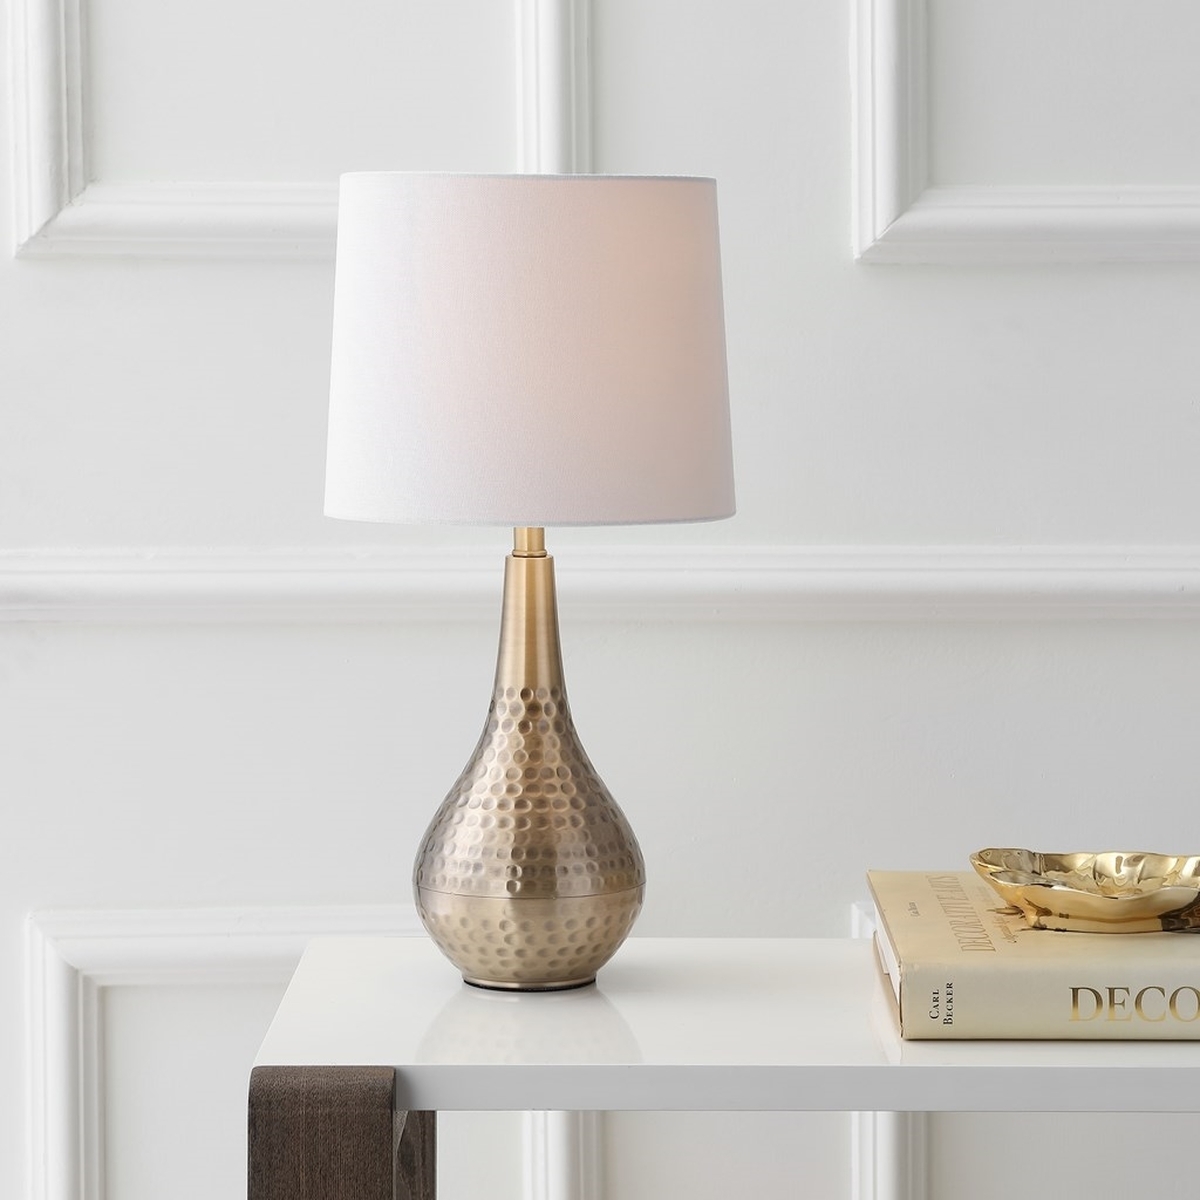 Medford Table Lamp - Brass Gold - Arlo Home - Image 3